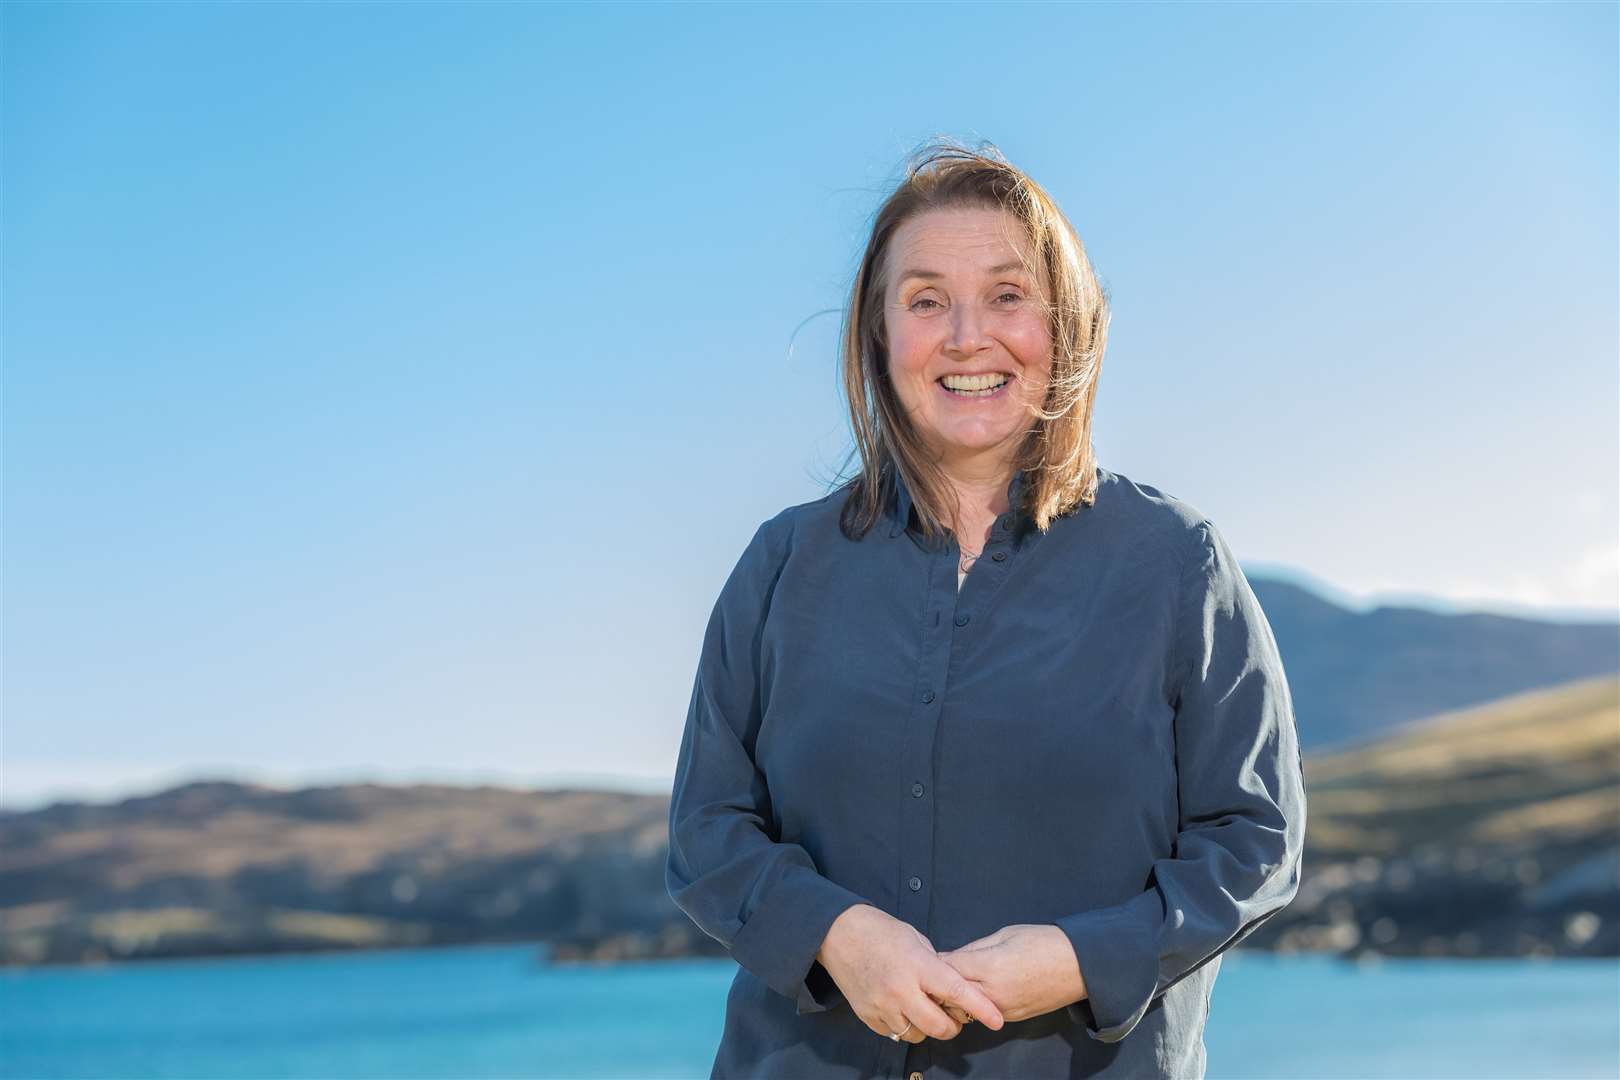 Dorothy Pritchard says Space Hub Sutherland will show how 'development, sustainability and protecting our natural environment can go hand in hand'. Picture: Duncan McLachlan